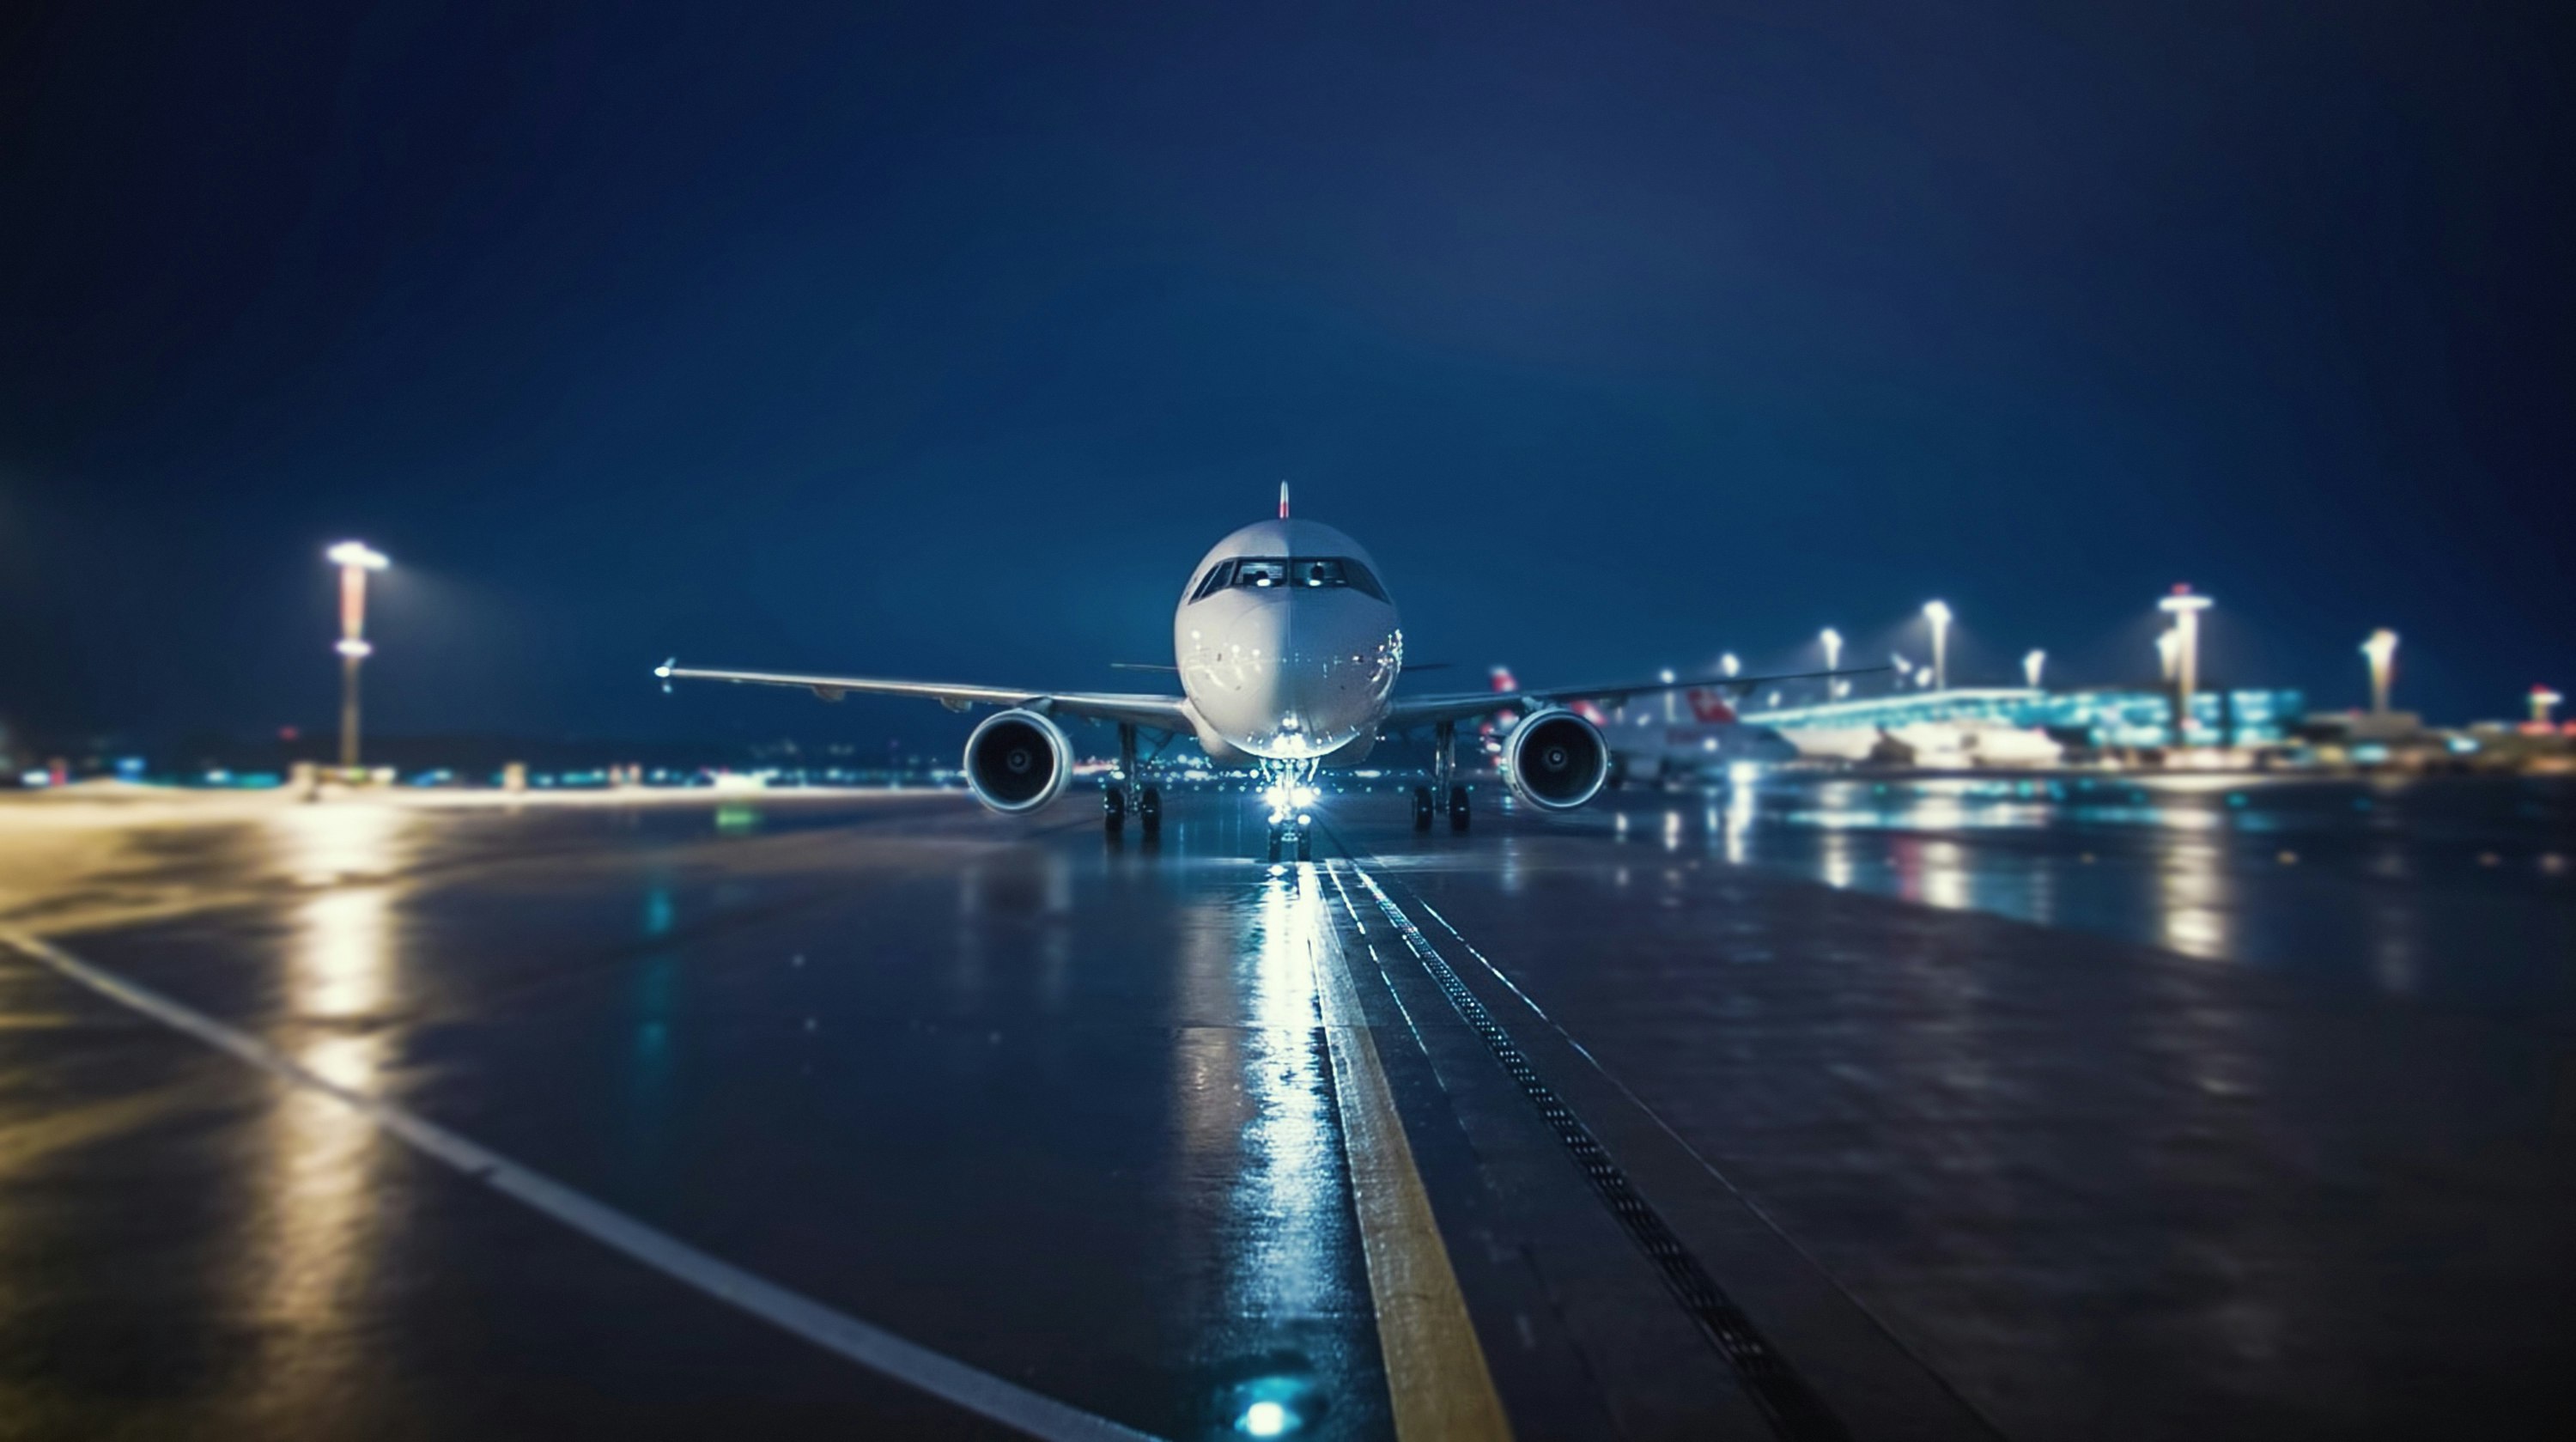 Travel News - Airplane Moving On Runway Against Sky At Night